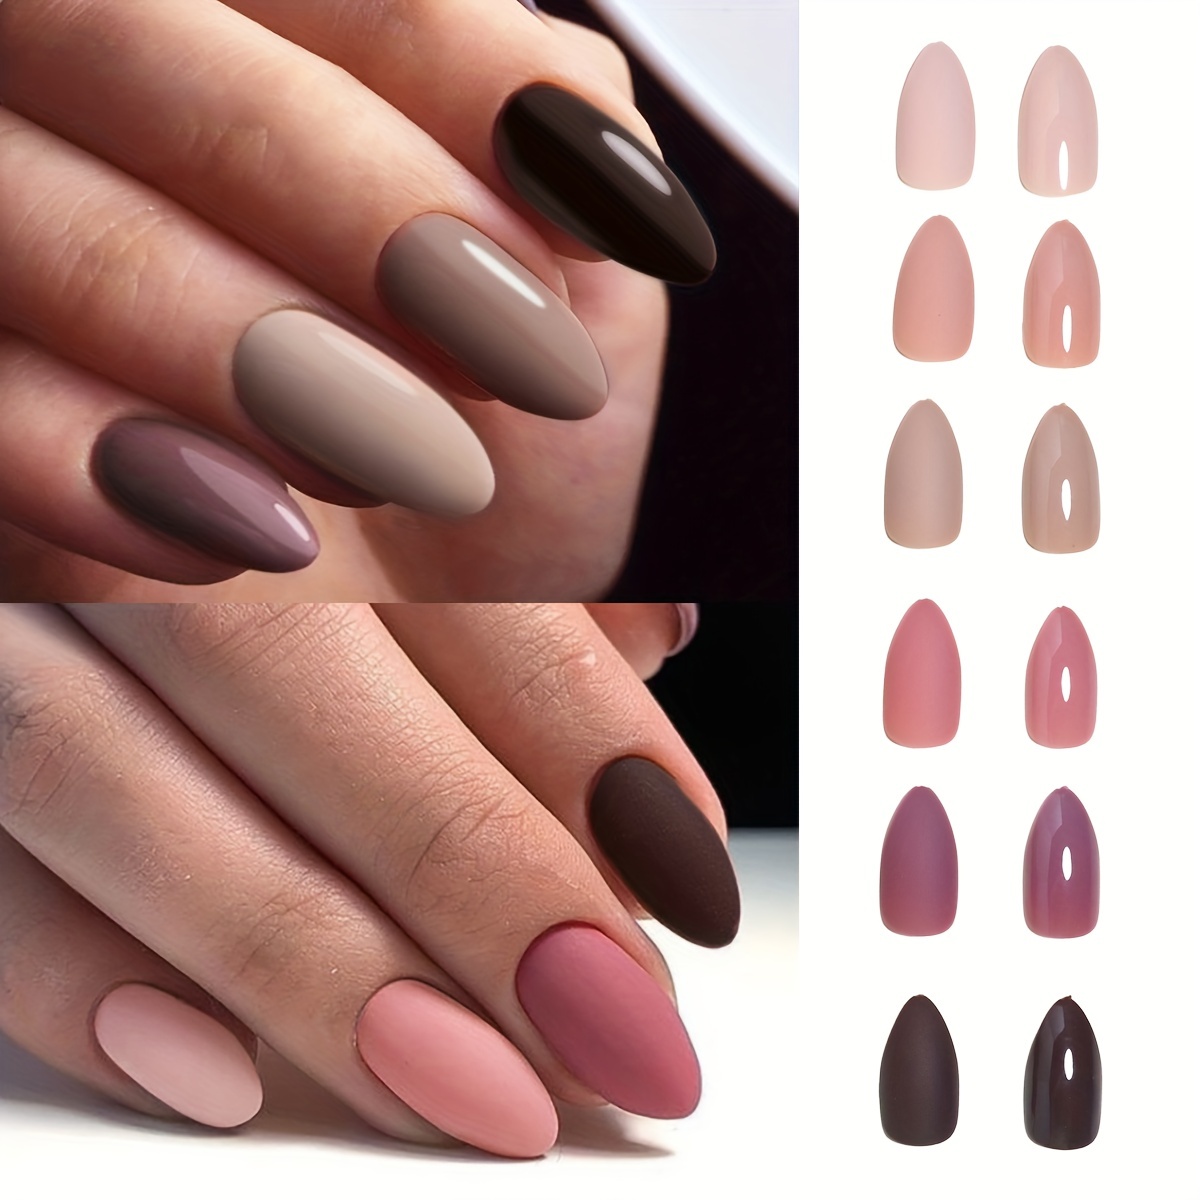 

12 Colors (288 Pcs) Short Almond Shaped False Nails For Autumn And Winter - Glossy And Matte Effects - Solid Color Press On Nails For Women And Girls - Diy Manicure